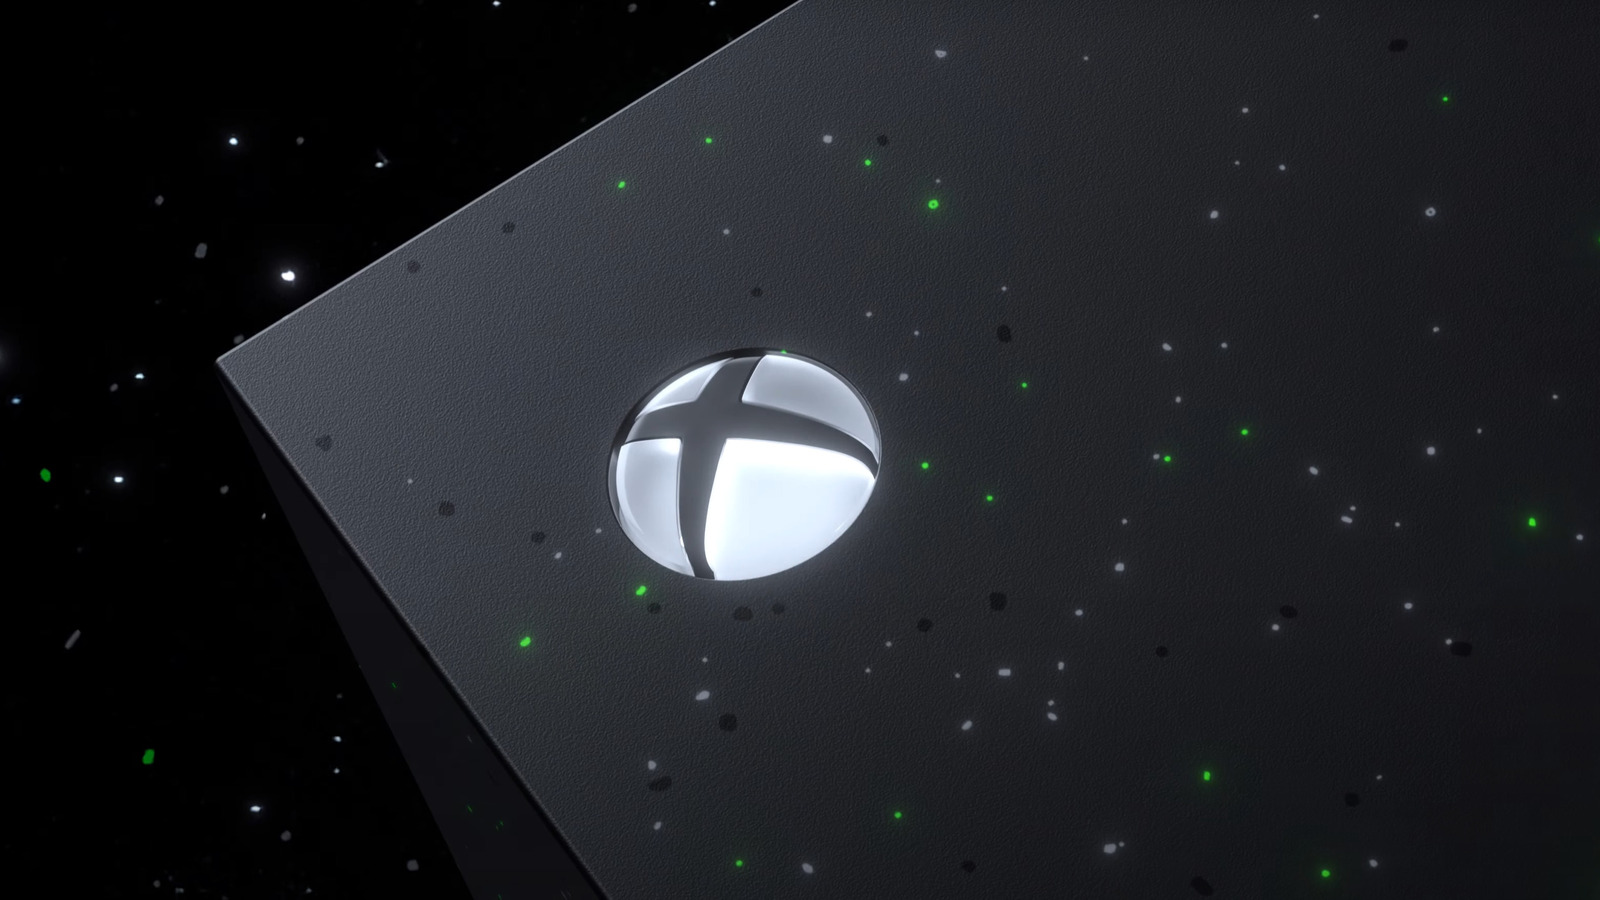 Microsoft's New Xbox Console Options Include Galaxy Black Special Edition